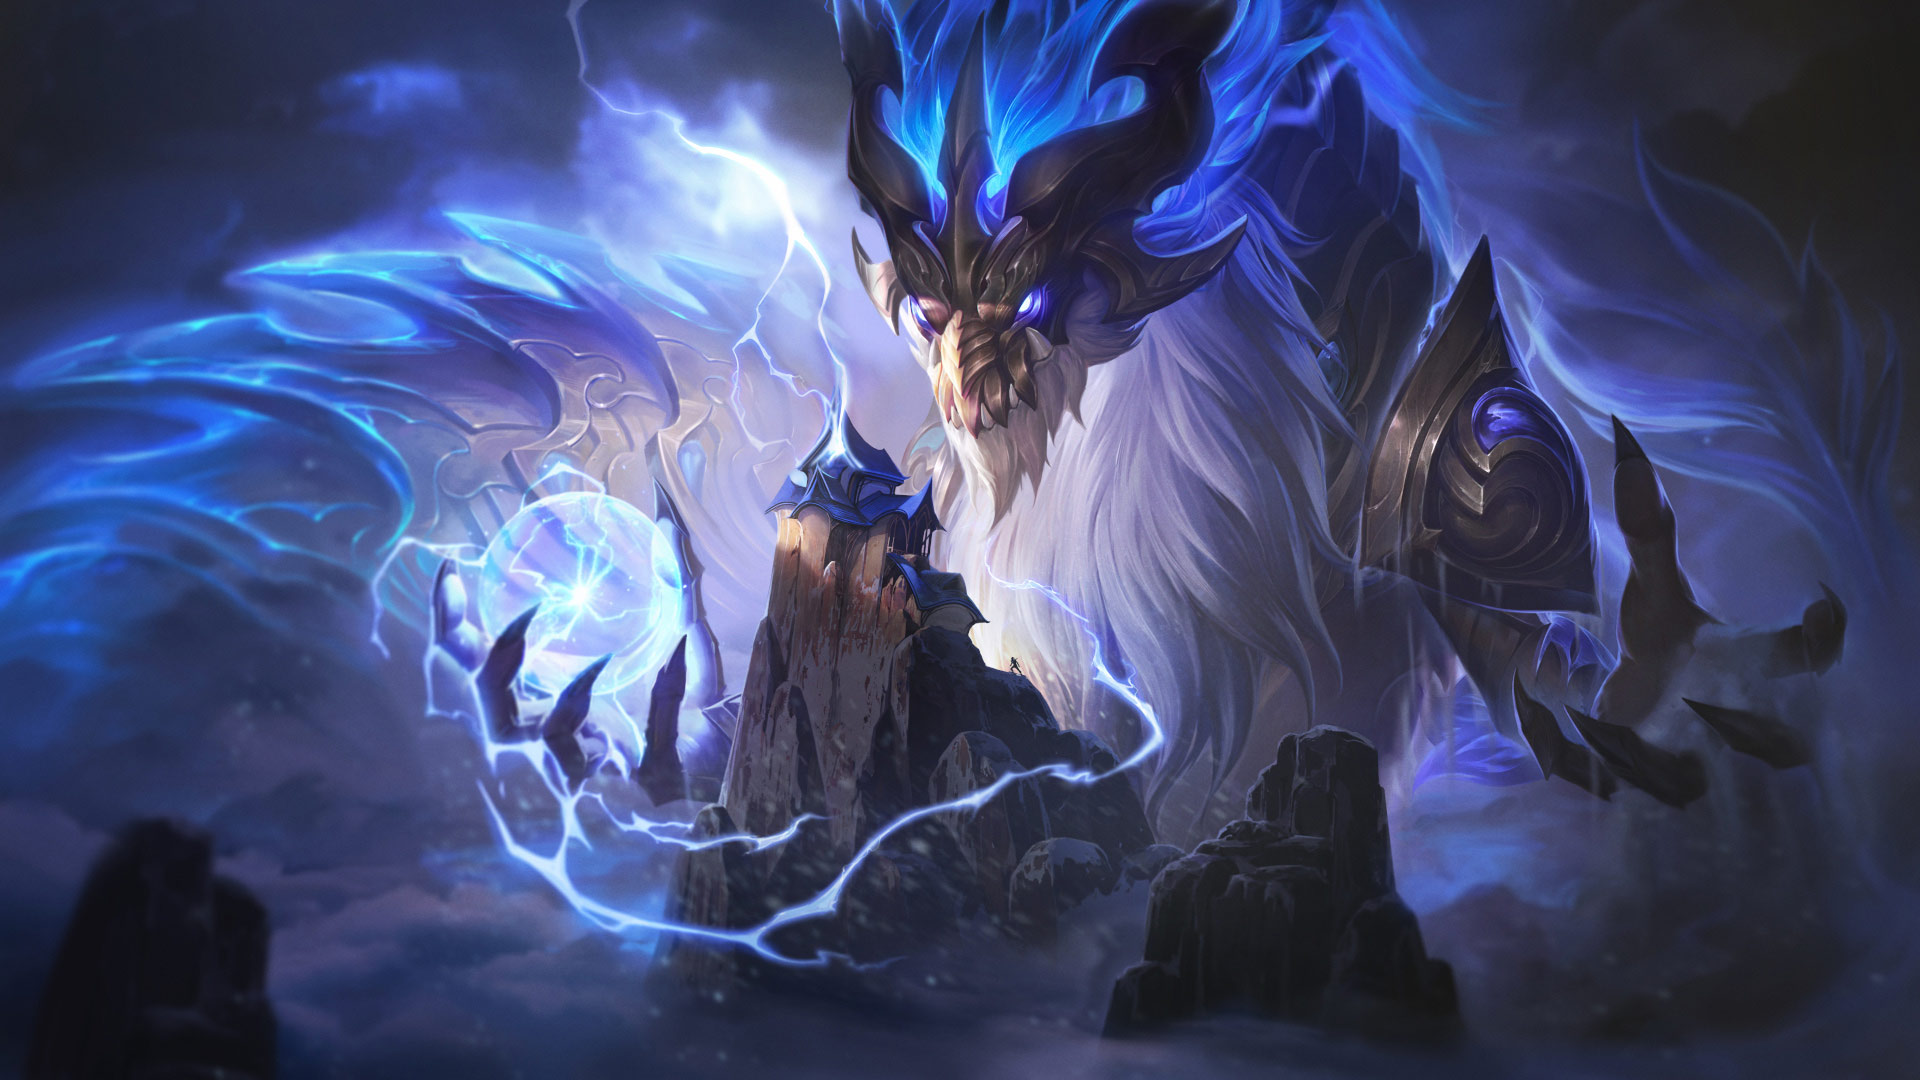 We already know the date on which the announced Aurelion Sol rework will arrive in League of Legends (LoL) and the changes to his abilities.